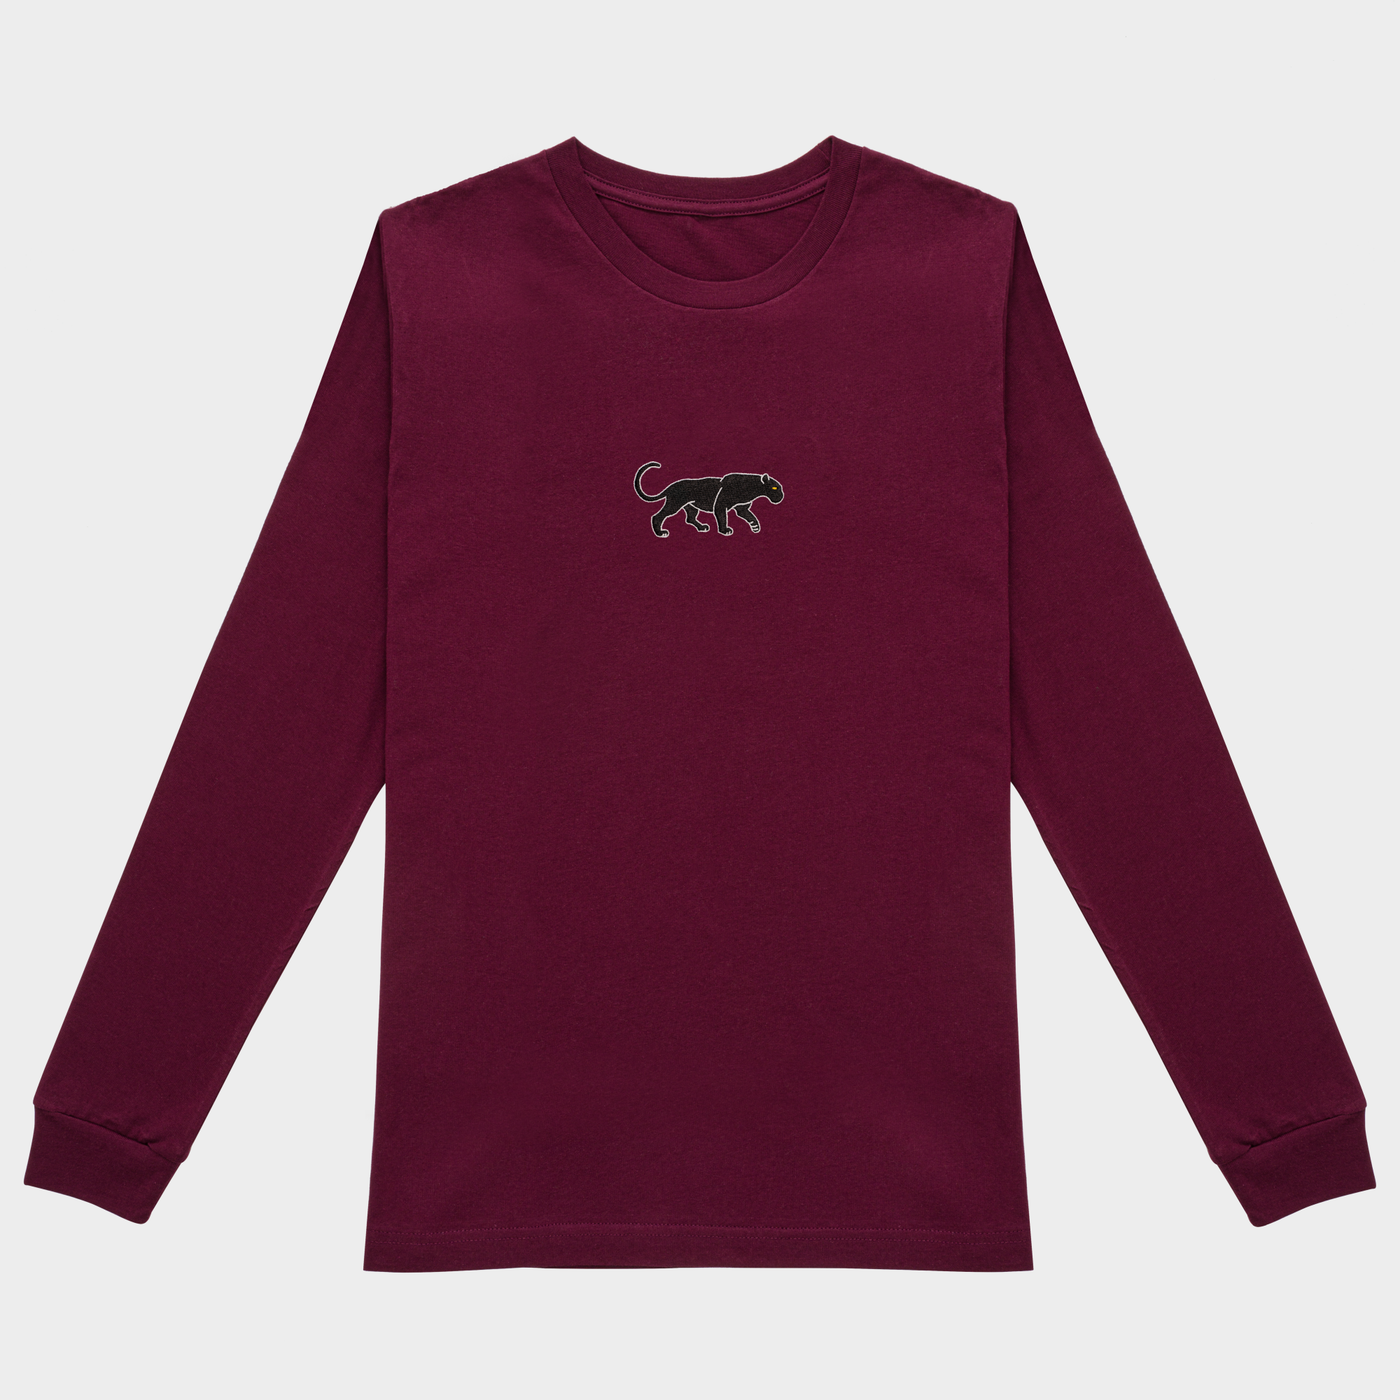 Bobby's Planet Men's Embroidered Black Jaguar Long Sleeve Shirt from South American Amazon Animals Collection in Maroon Color#color_maroon